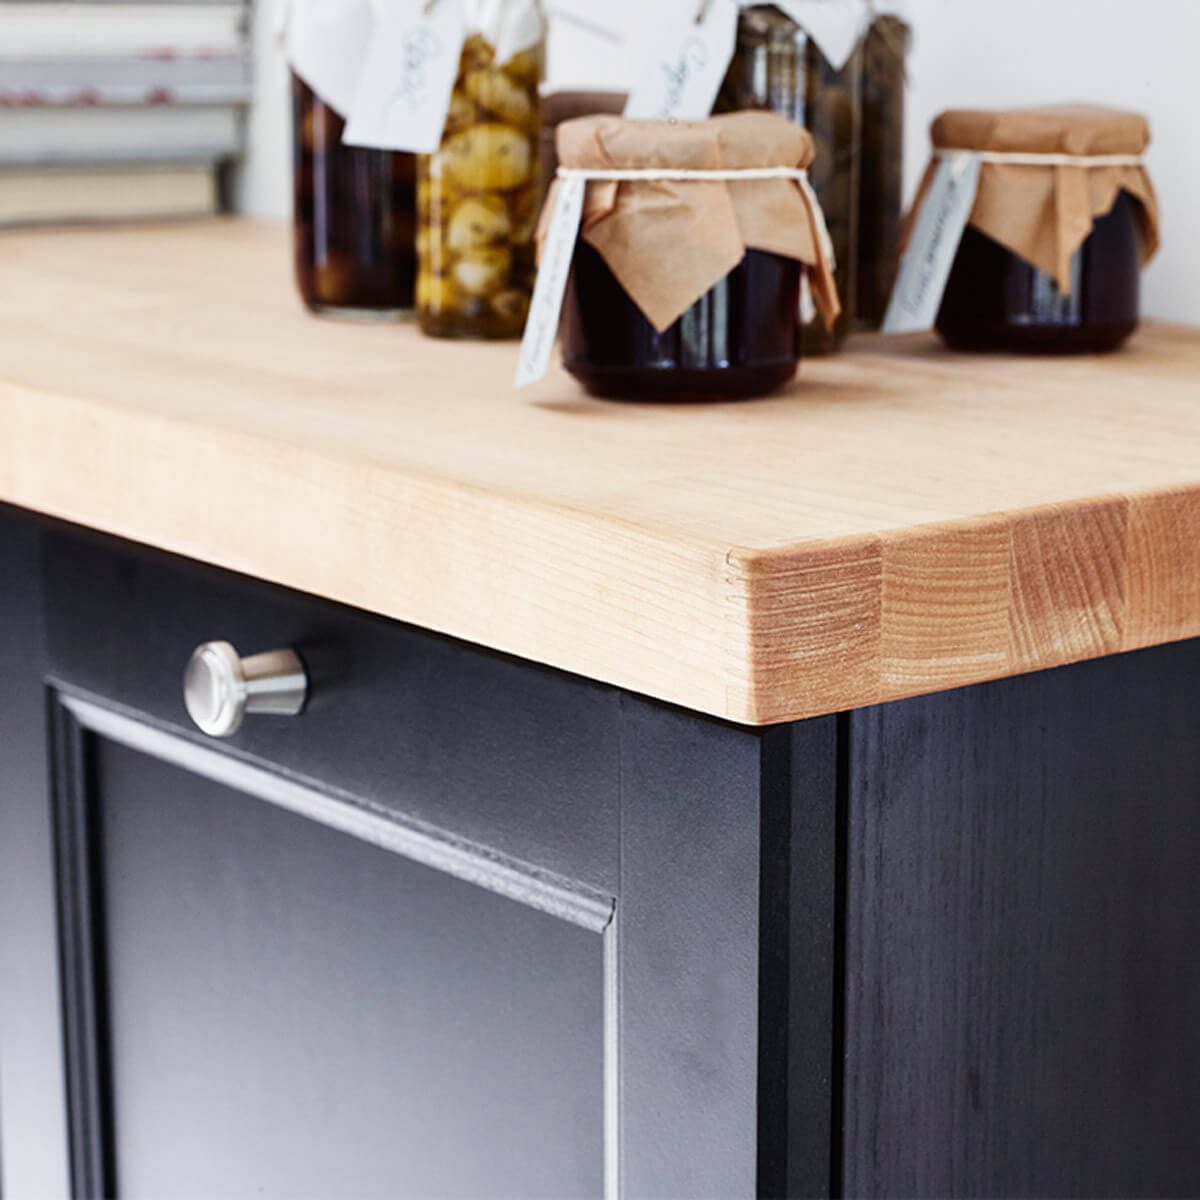 13 Awesome Countertops That Arent Granite Family Handyman